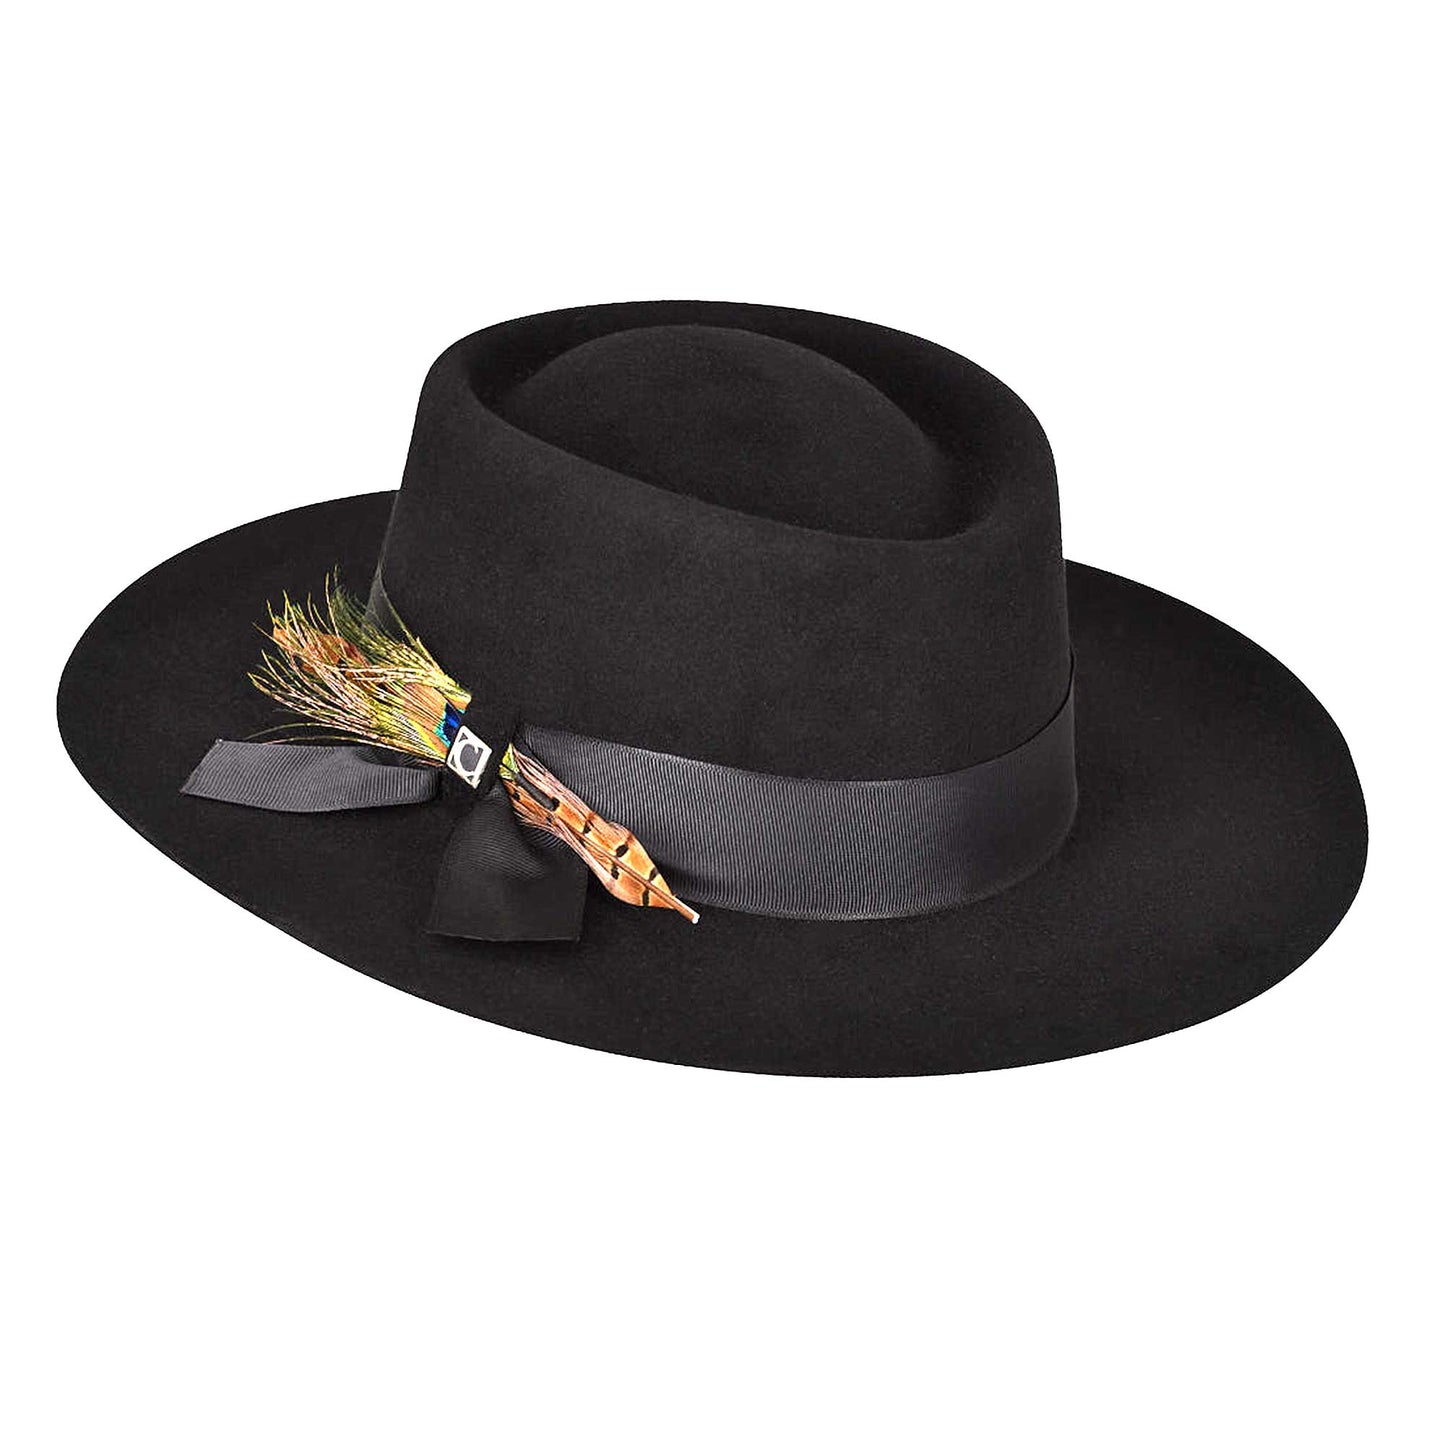 Cuadra black hat with fabric and feathers headband